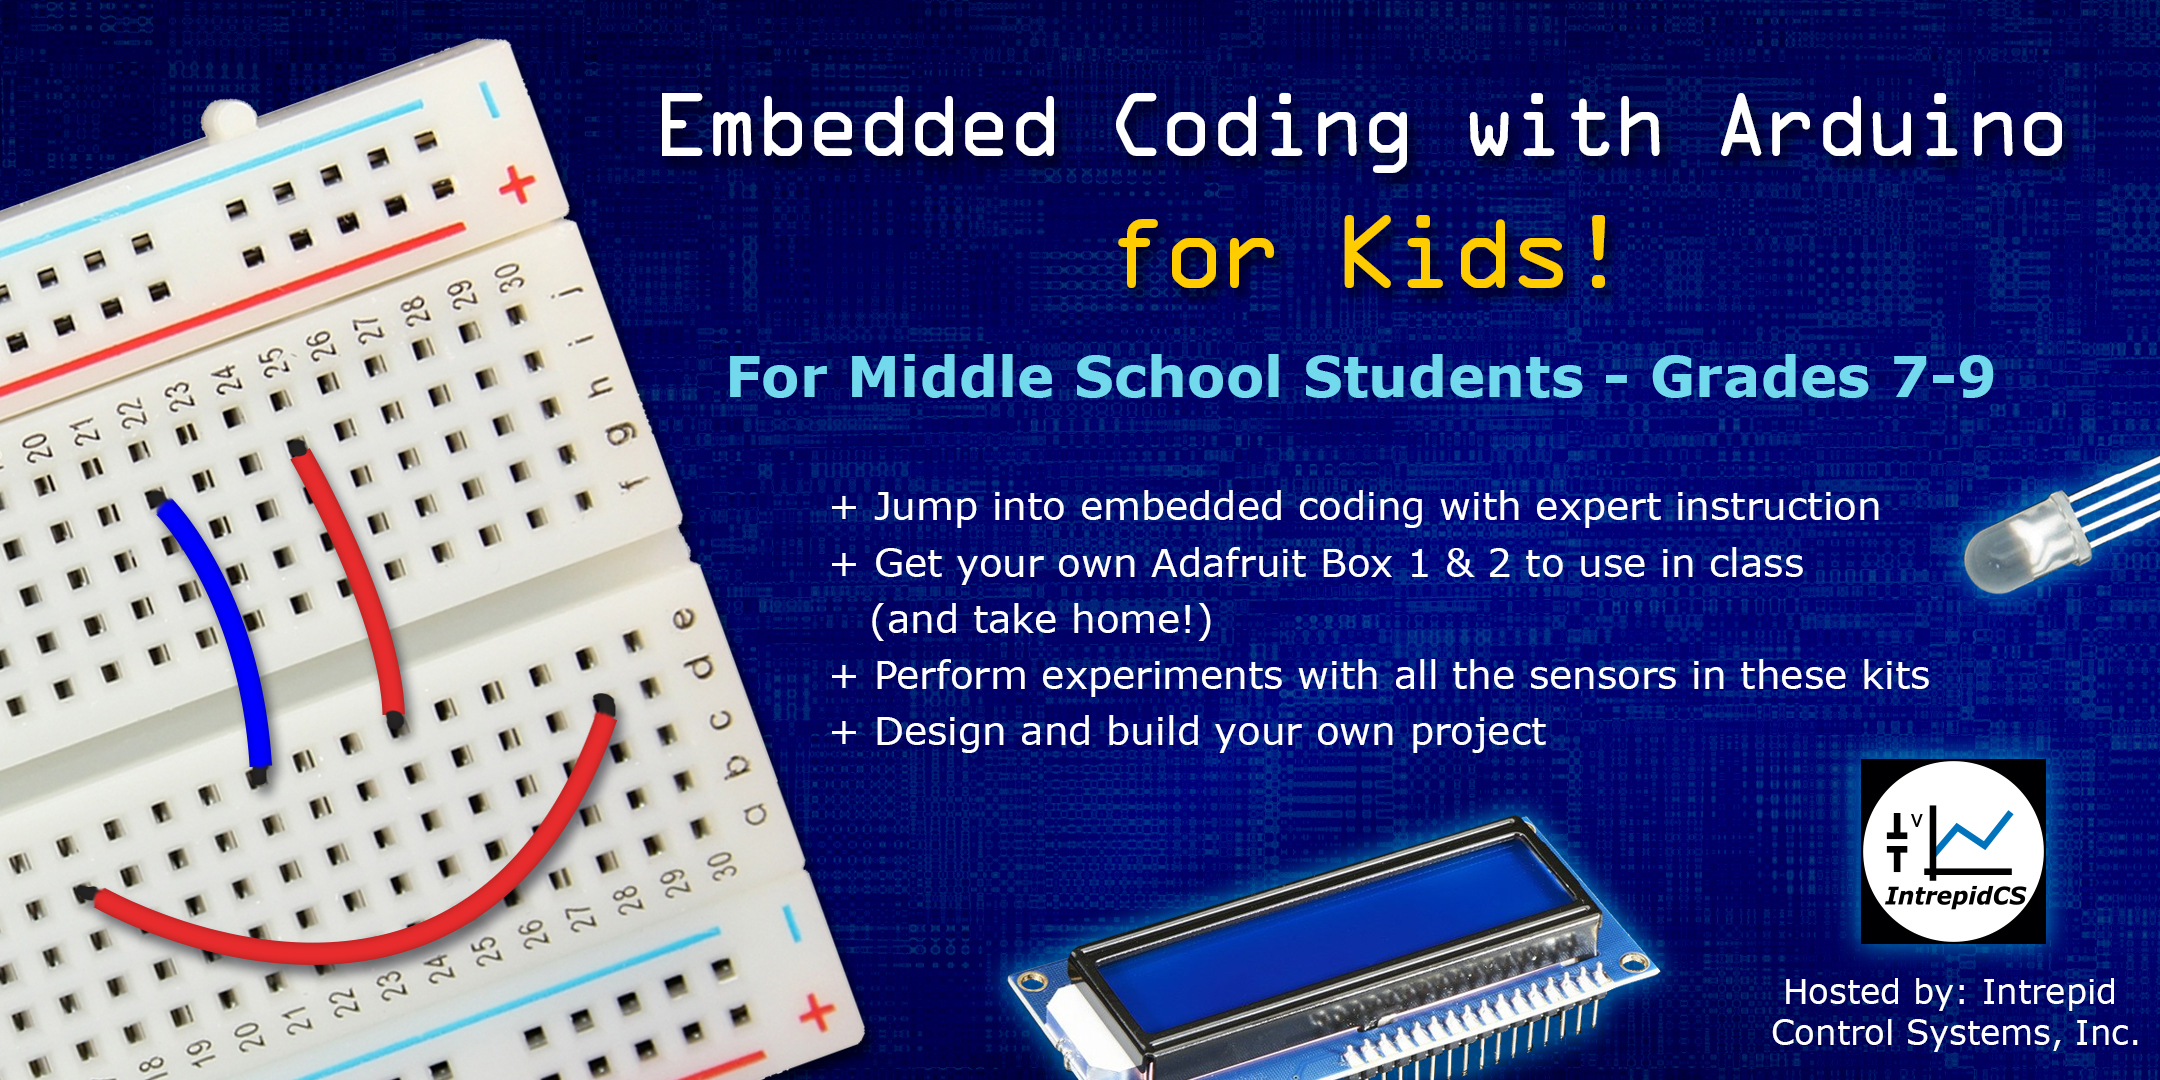 Embedded Coding for Kids Announcement